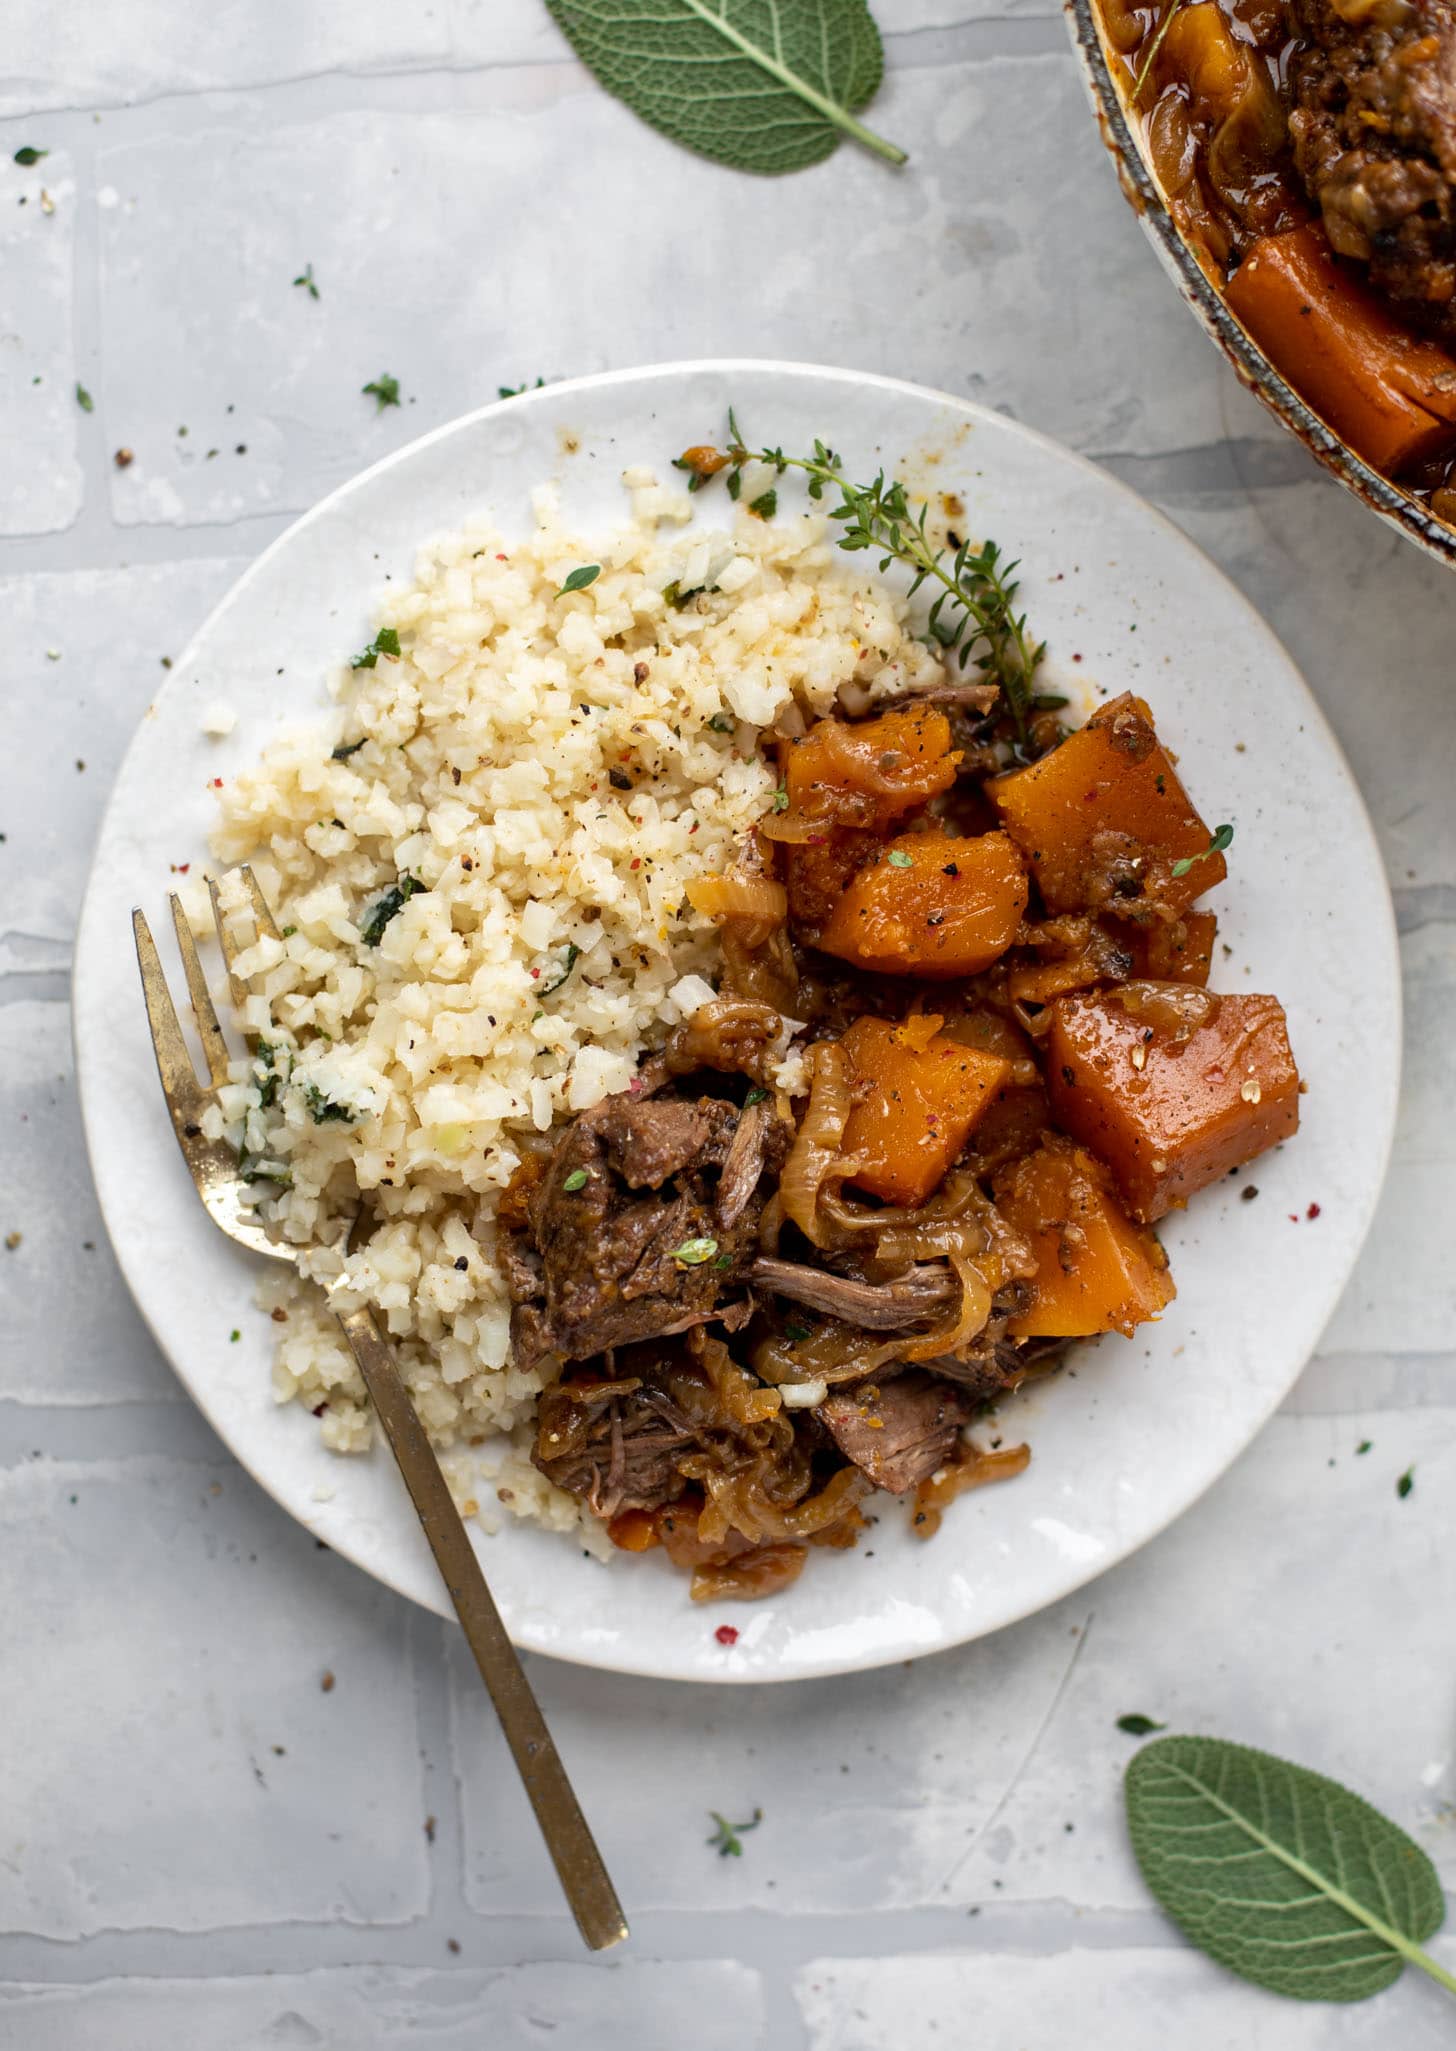 cider braised pot roast with caramelized onions, butternut squash and cauliflower rice